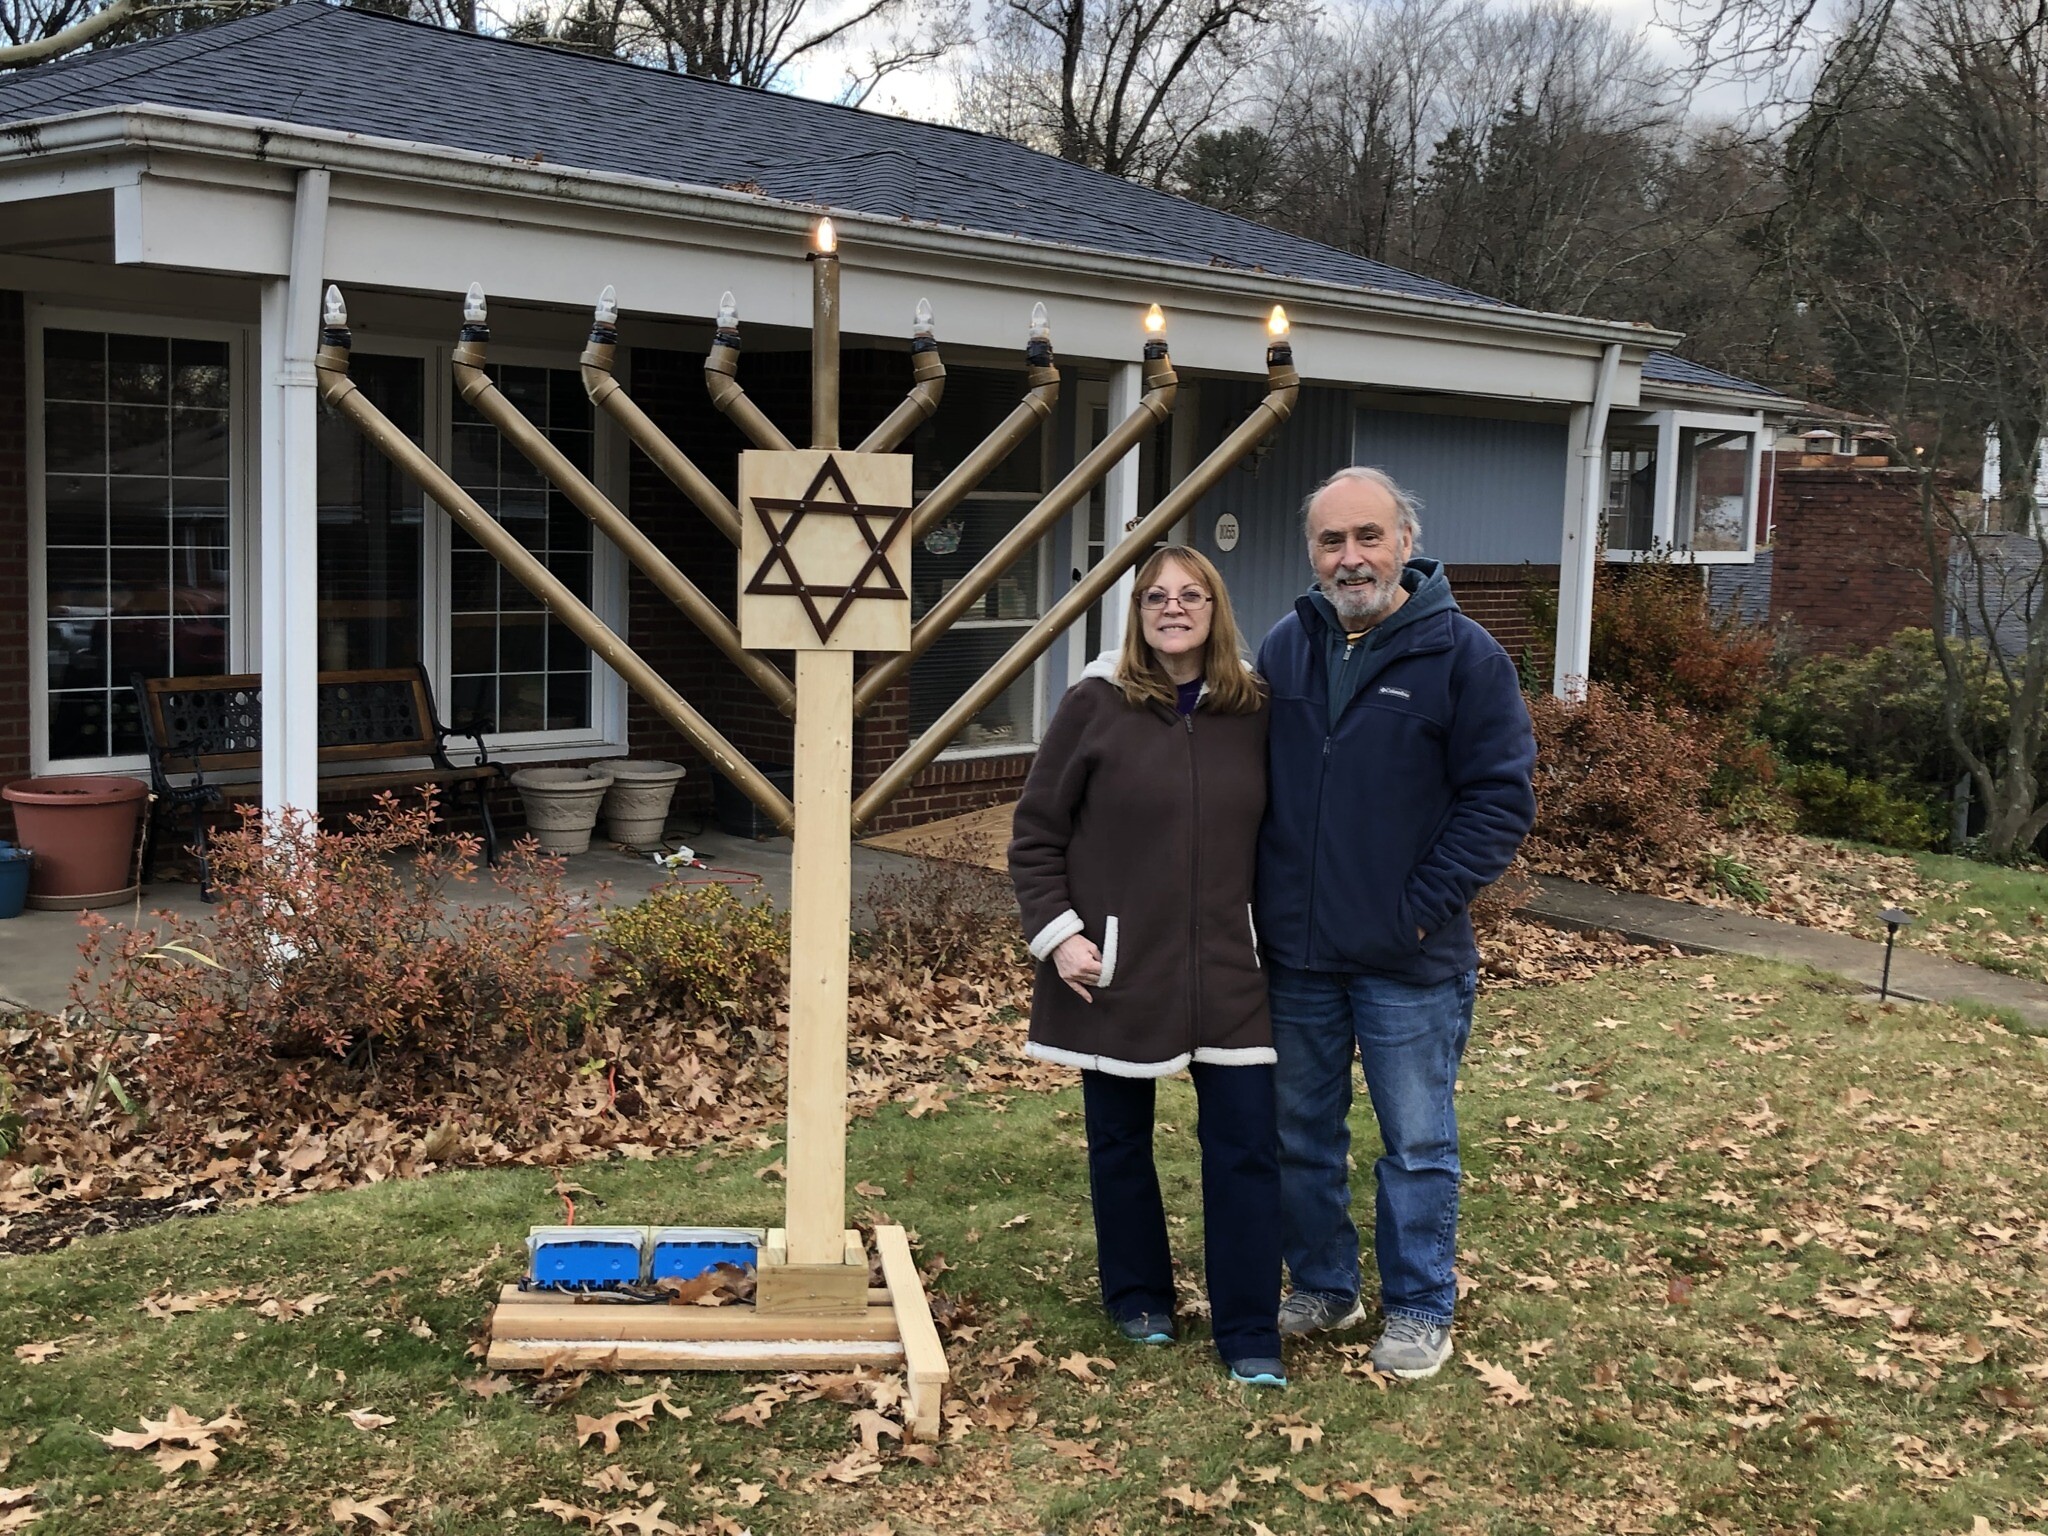 Marsha and Randy Boswell stand near a menorah he built. Photo courtesy of Randy Boswell